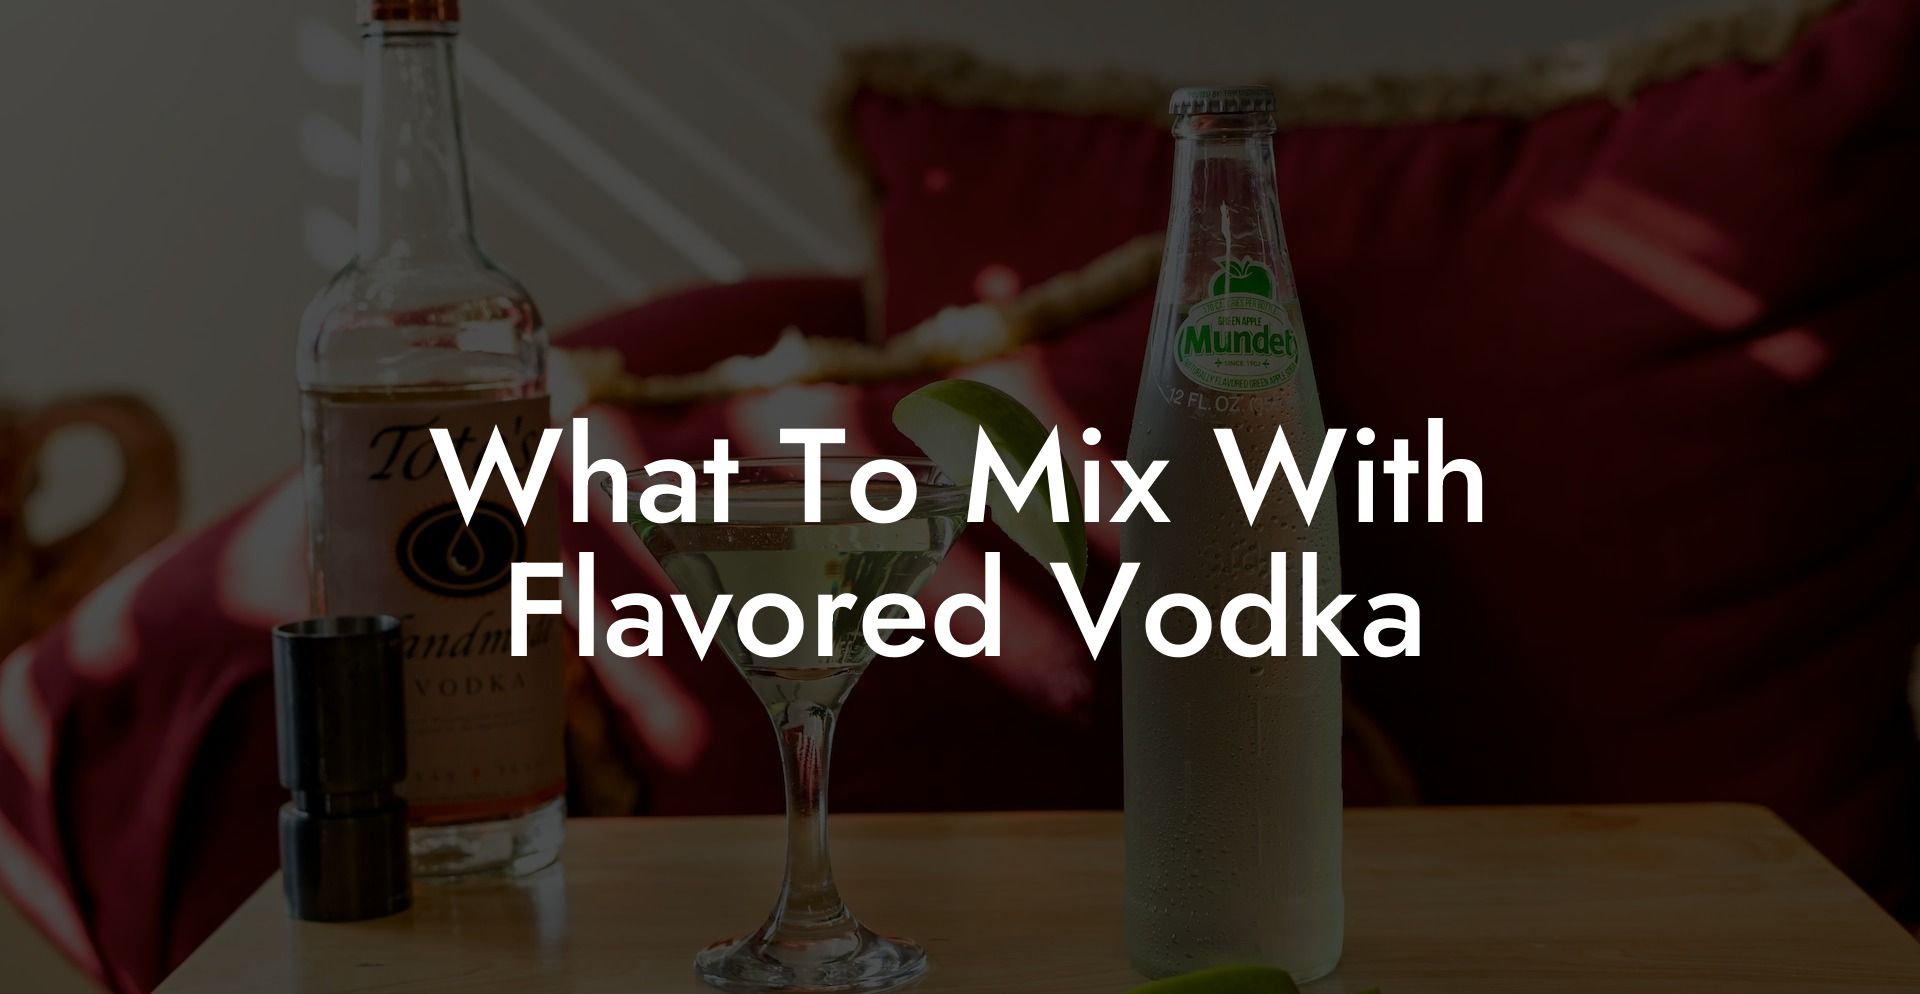 What To Mix With Flavored Vodka